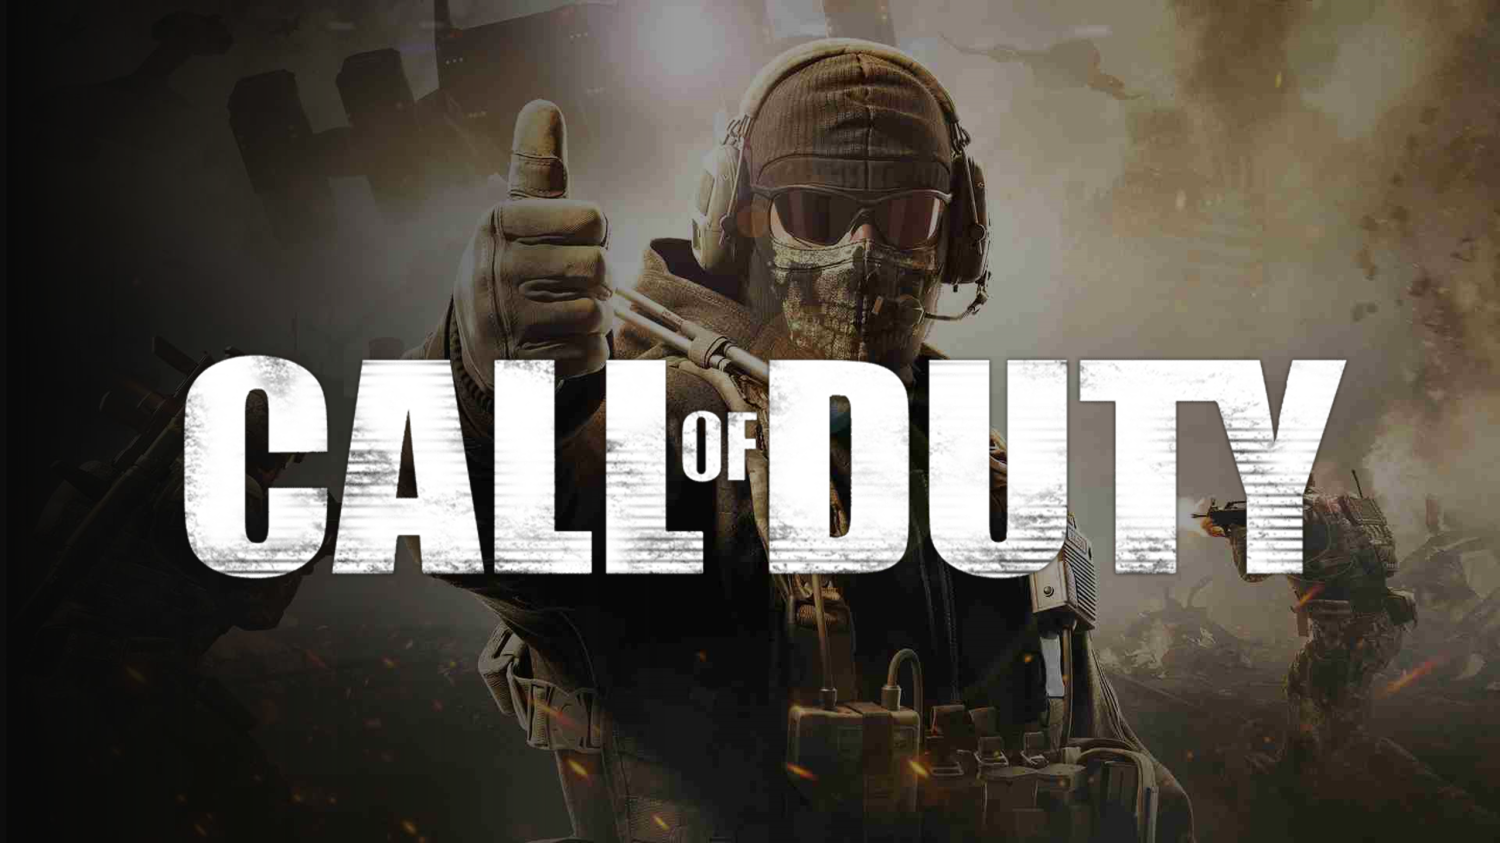 Report Call of Duty 2023 will be a full game set in Modern Warfare